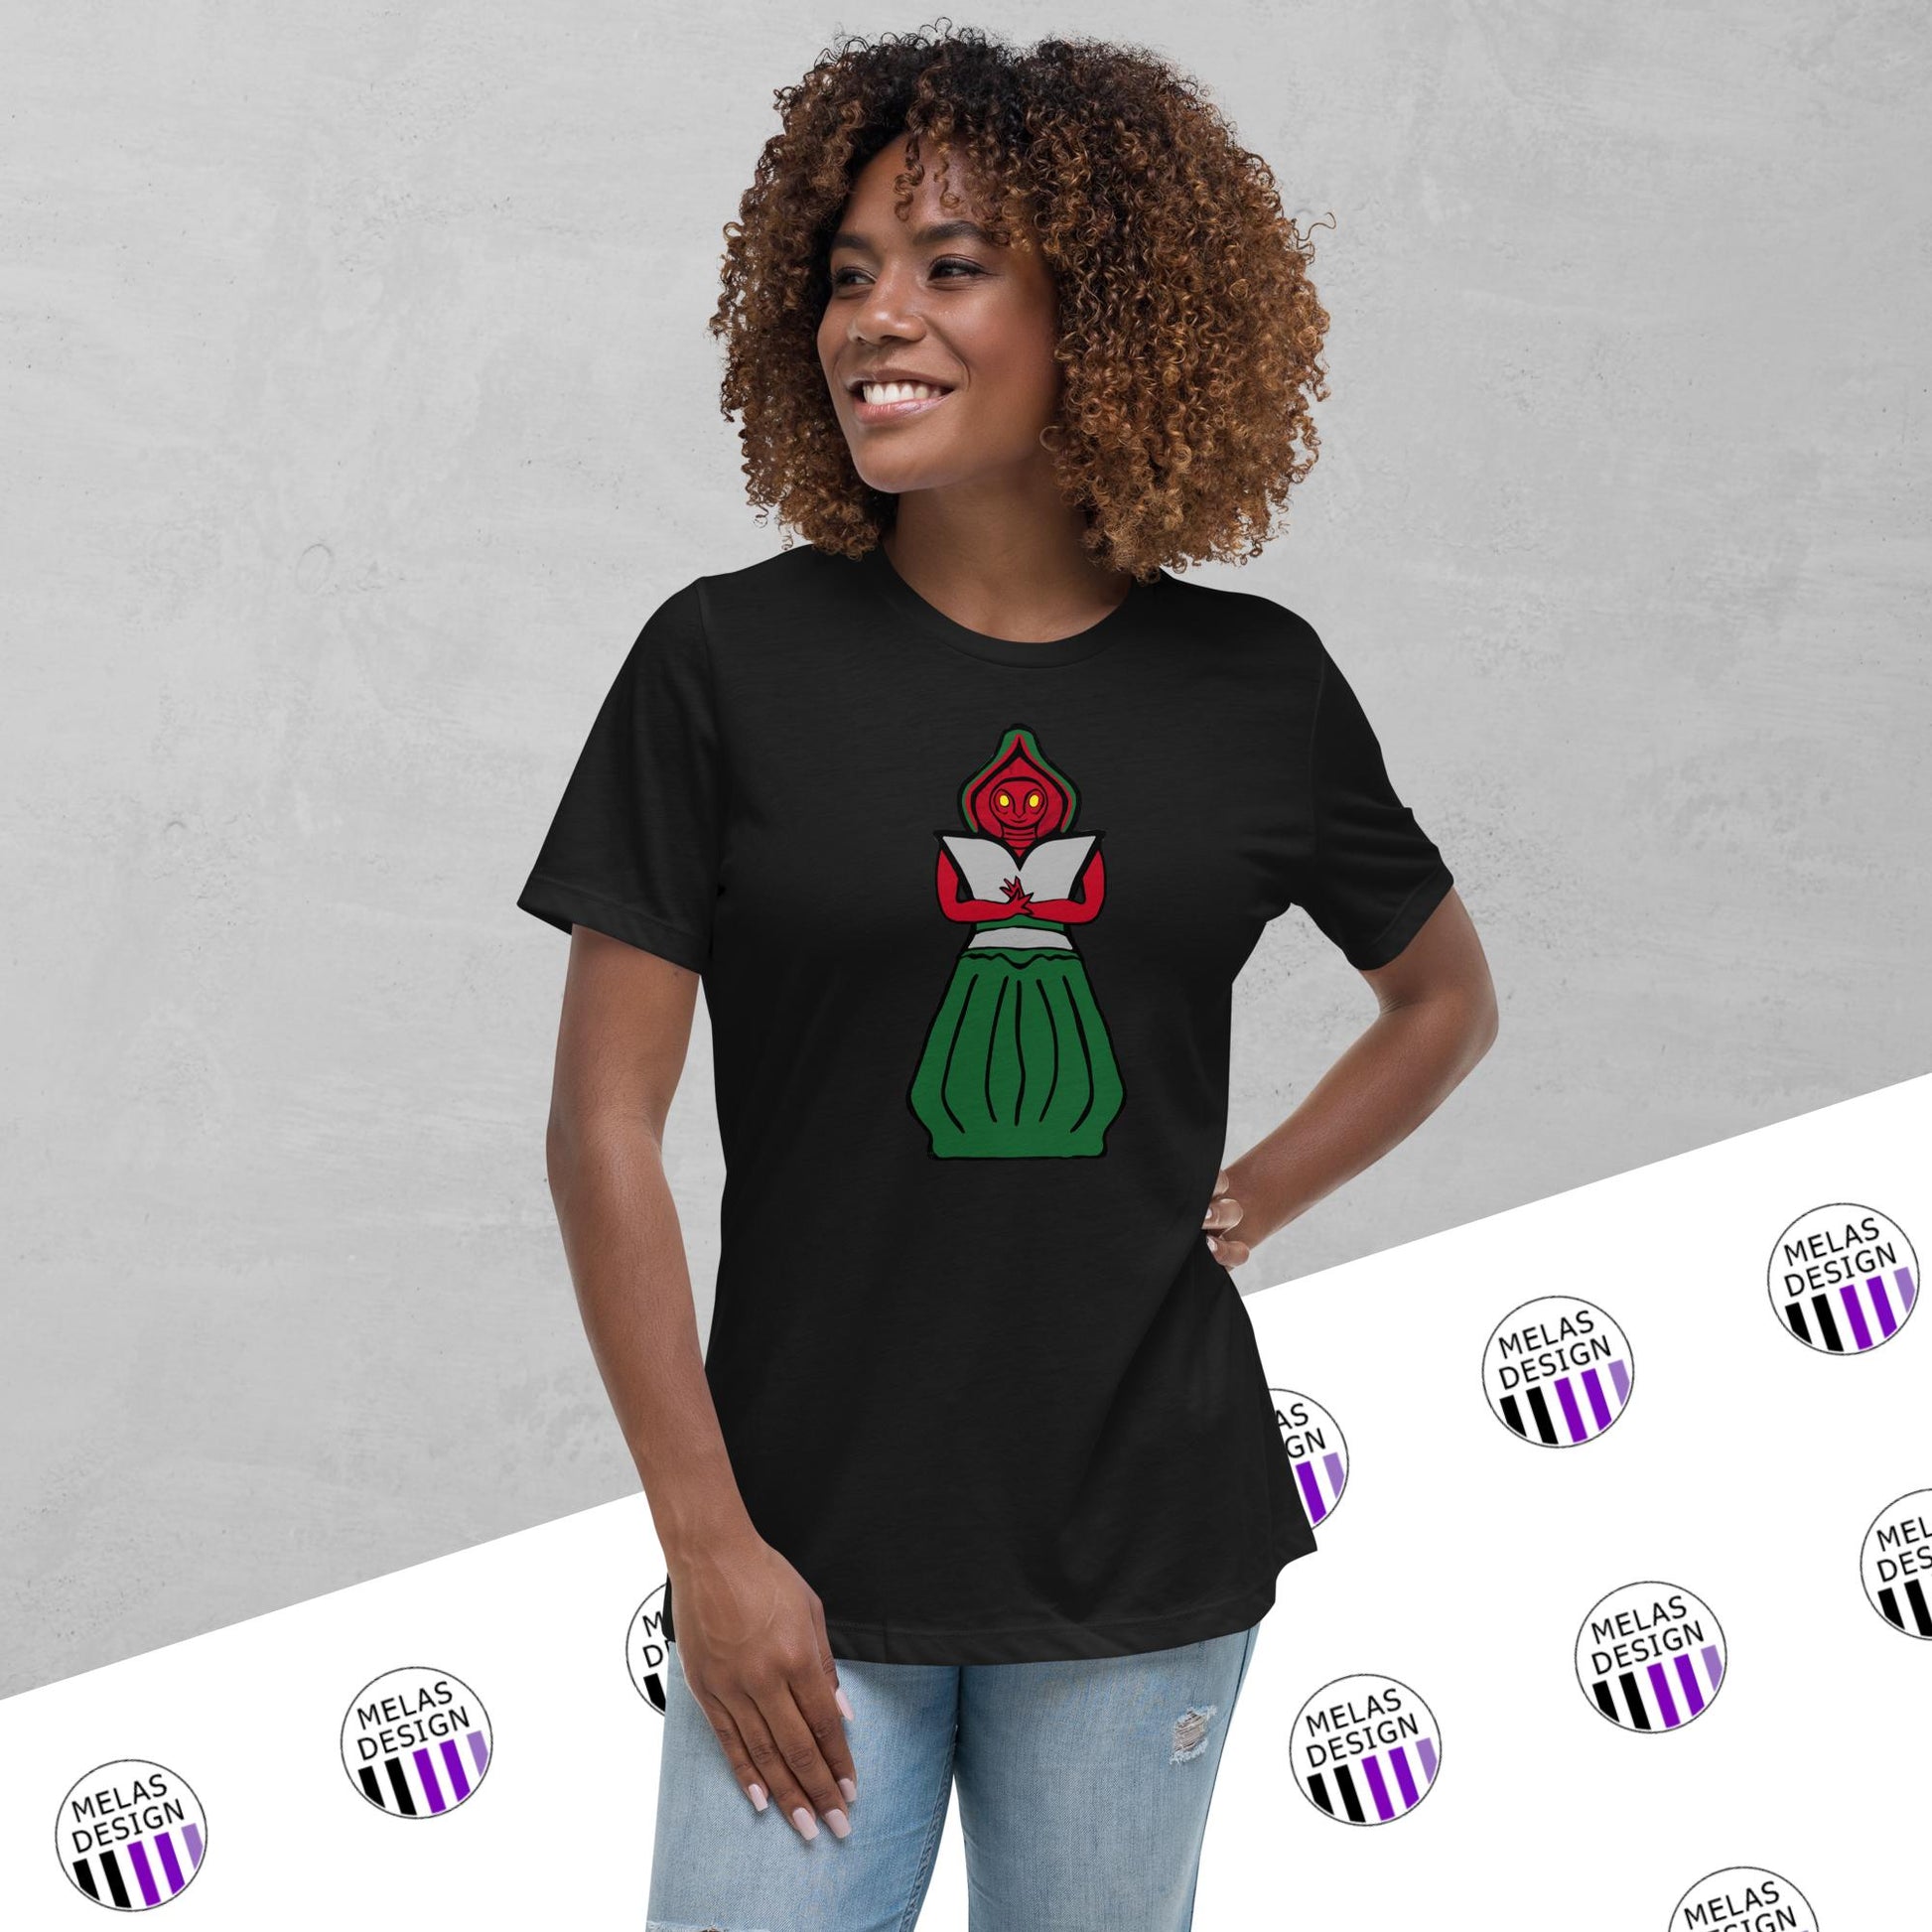 Flatwoods Monster womens relaxed t-shirt; Flatwoods Monster; fashion; shirts; t-shirt; cryptid; Melasdesign; West Virginia; Braxie; Braxton County Monster; womens; relaxed fit